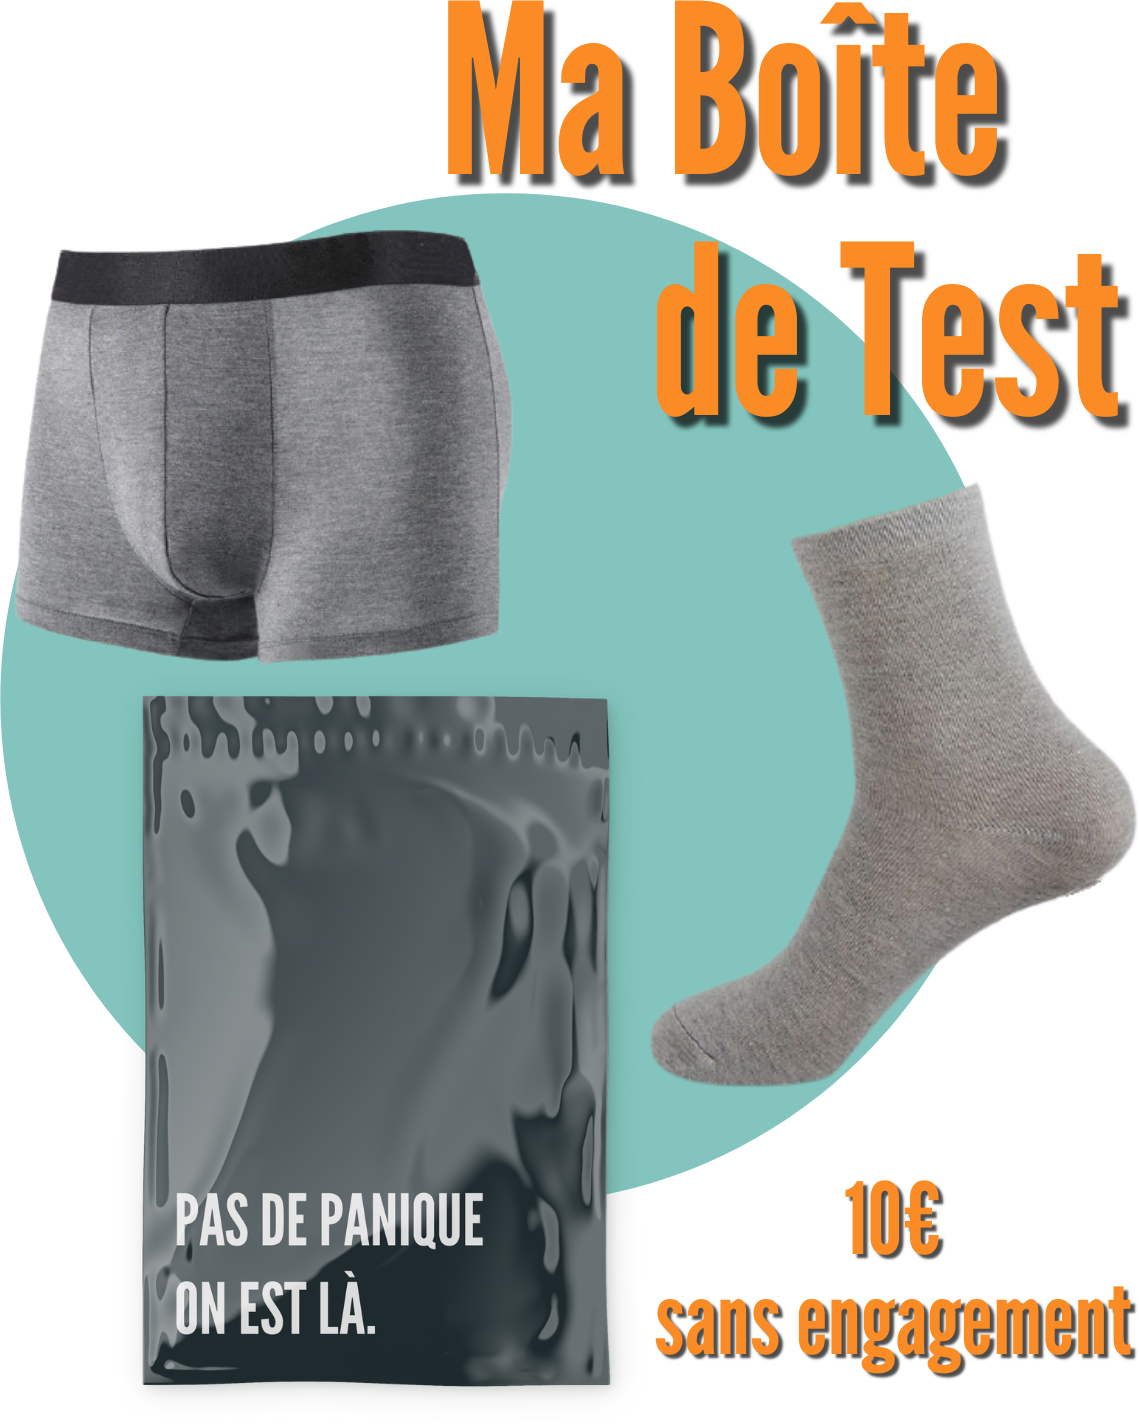 888-boite-test.png